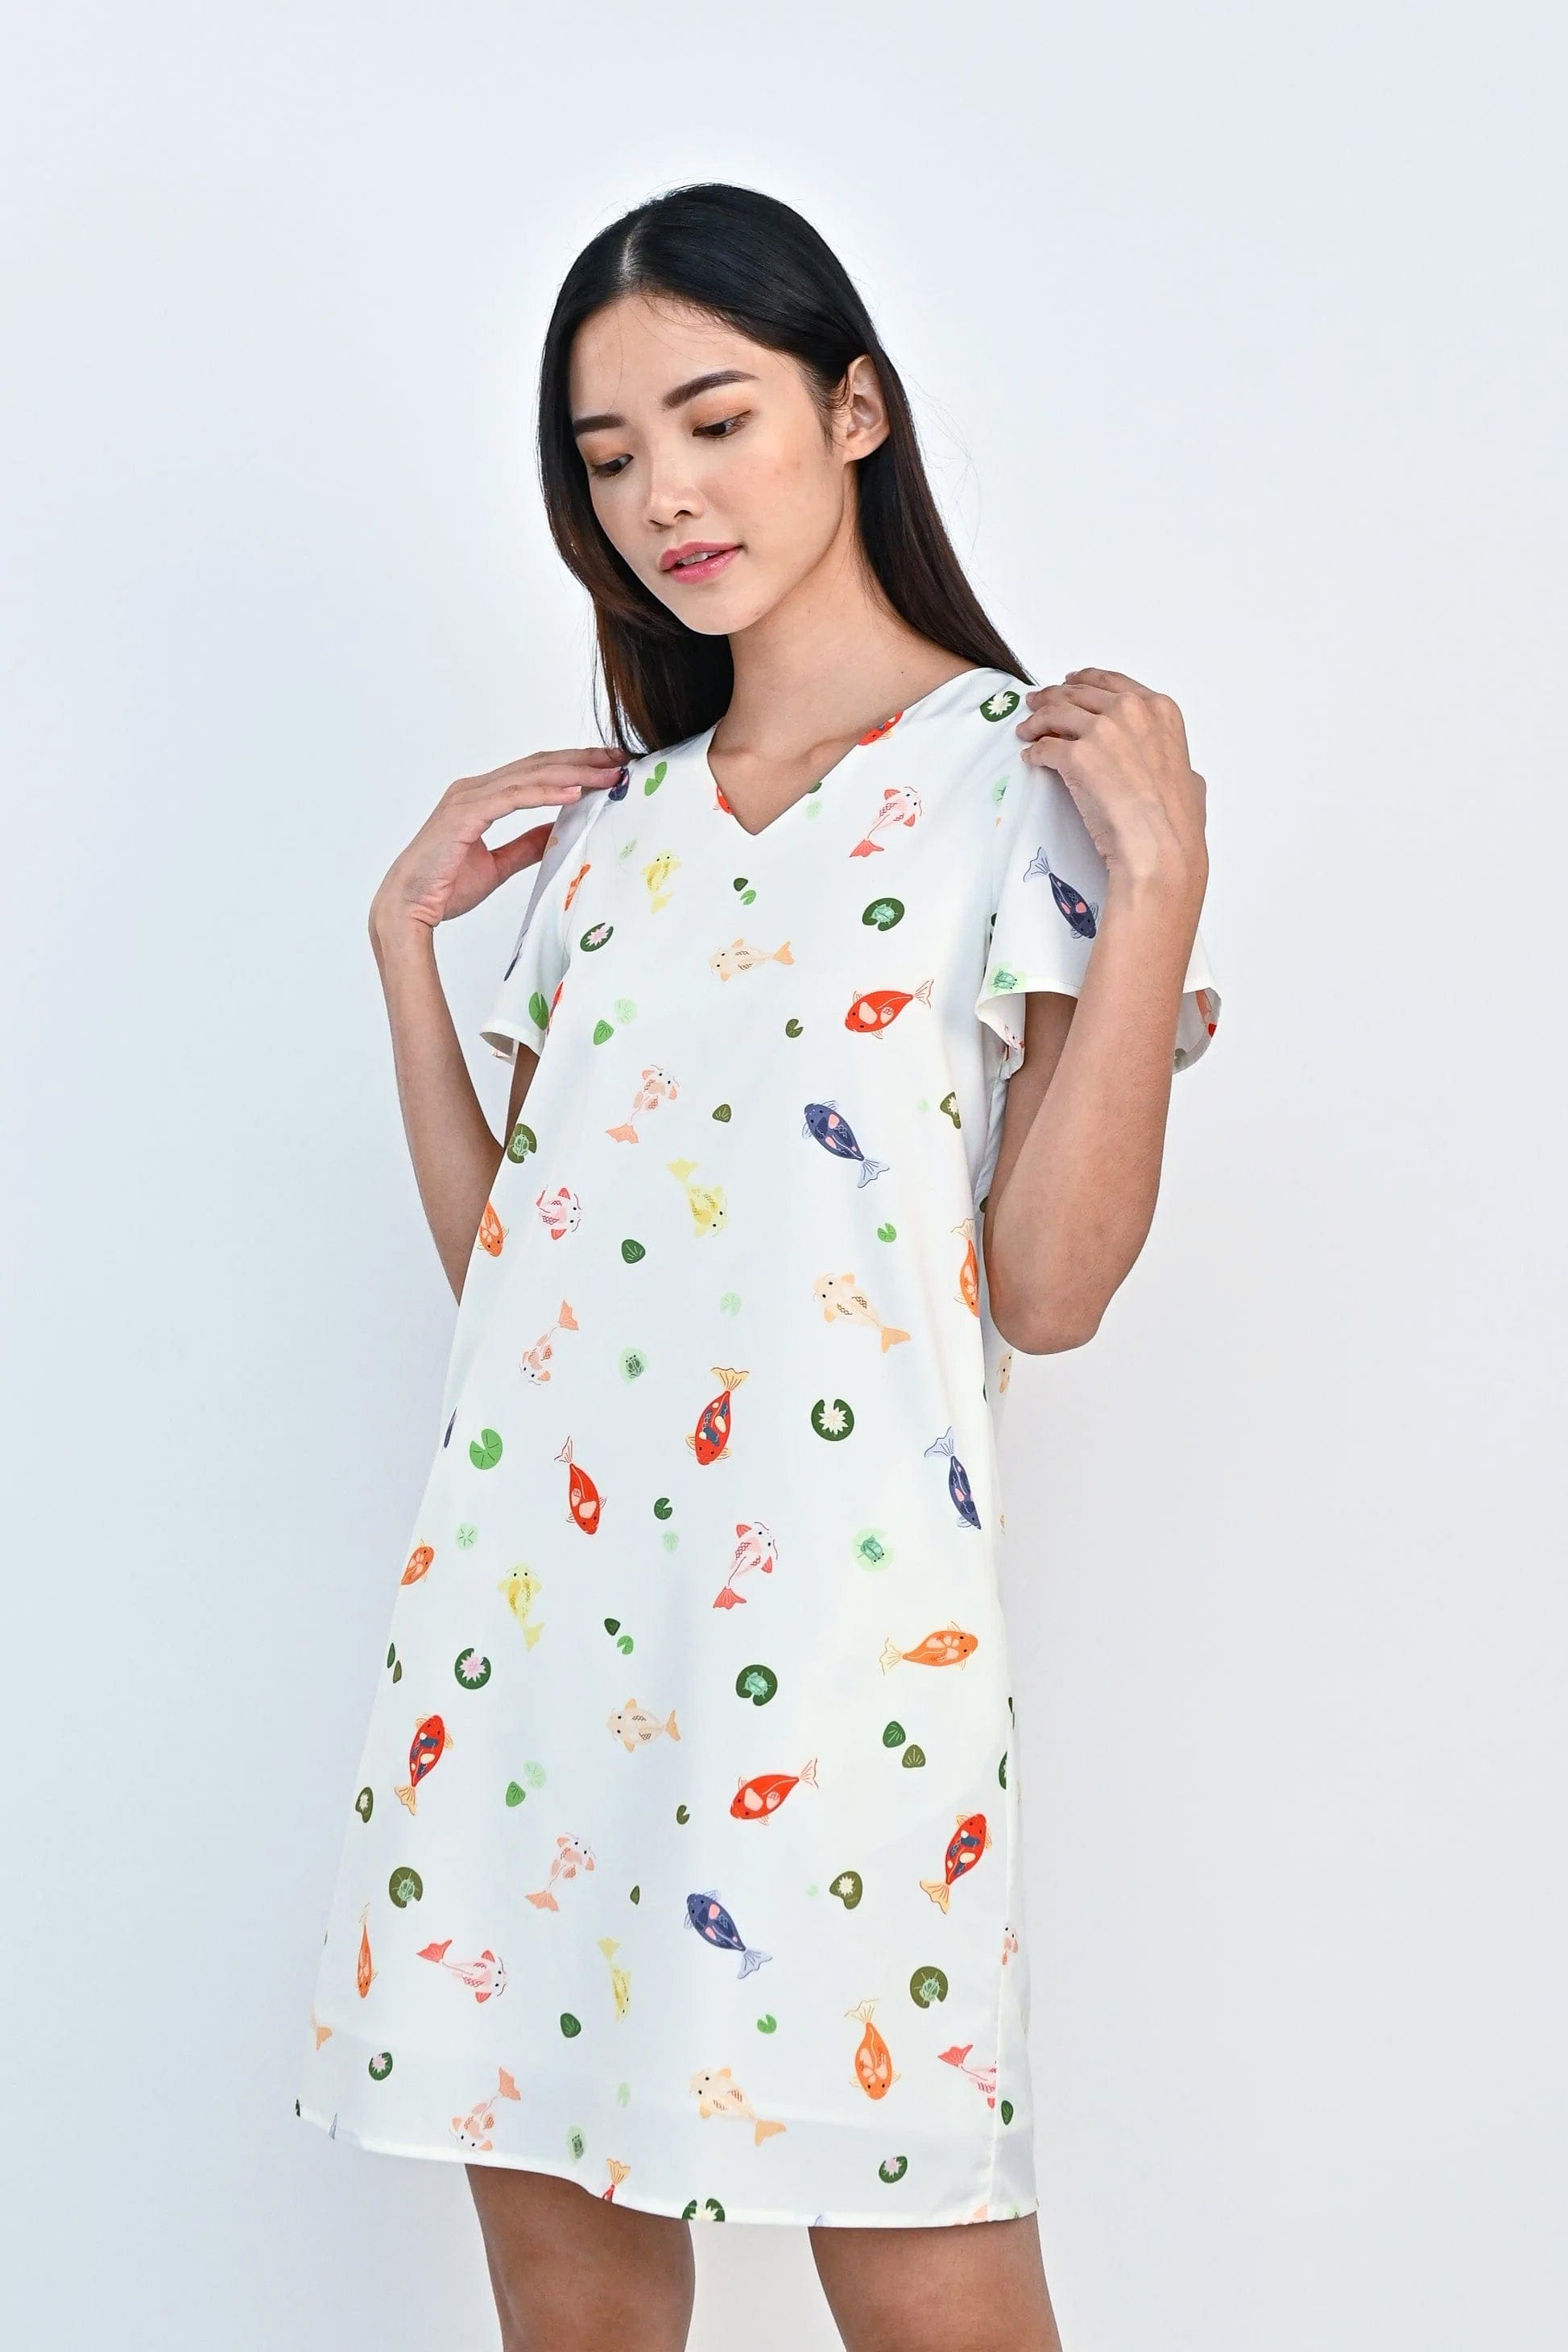 LUCKY KOI SLEEVED DRESS IN OFF-WHITE – All Would Envy